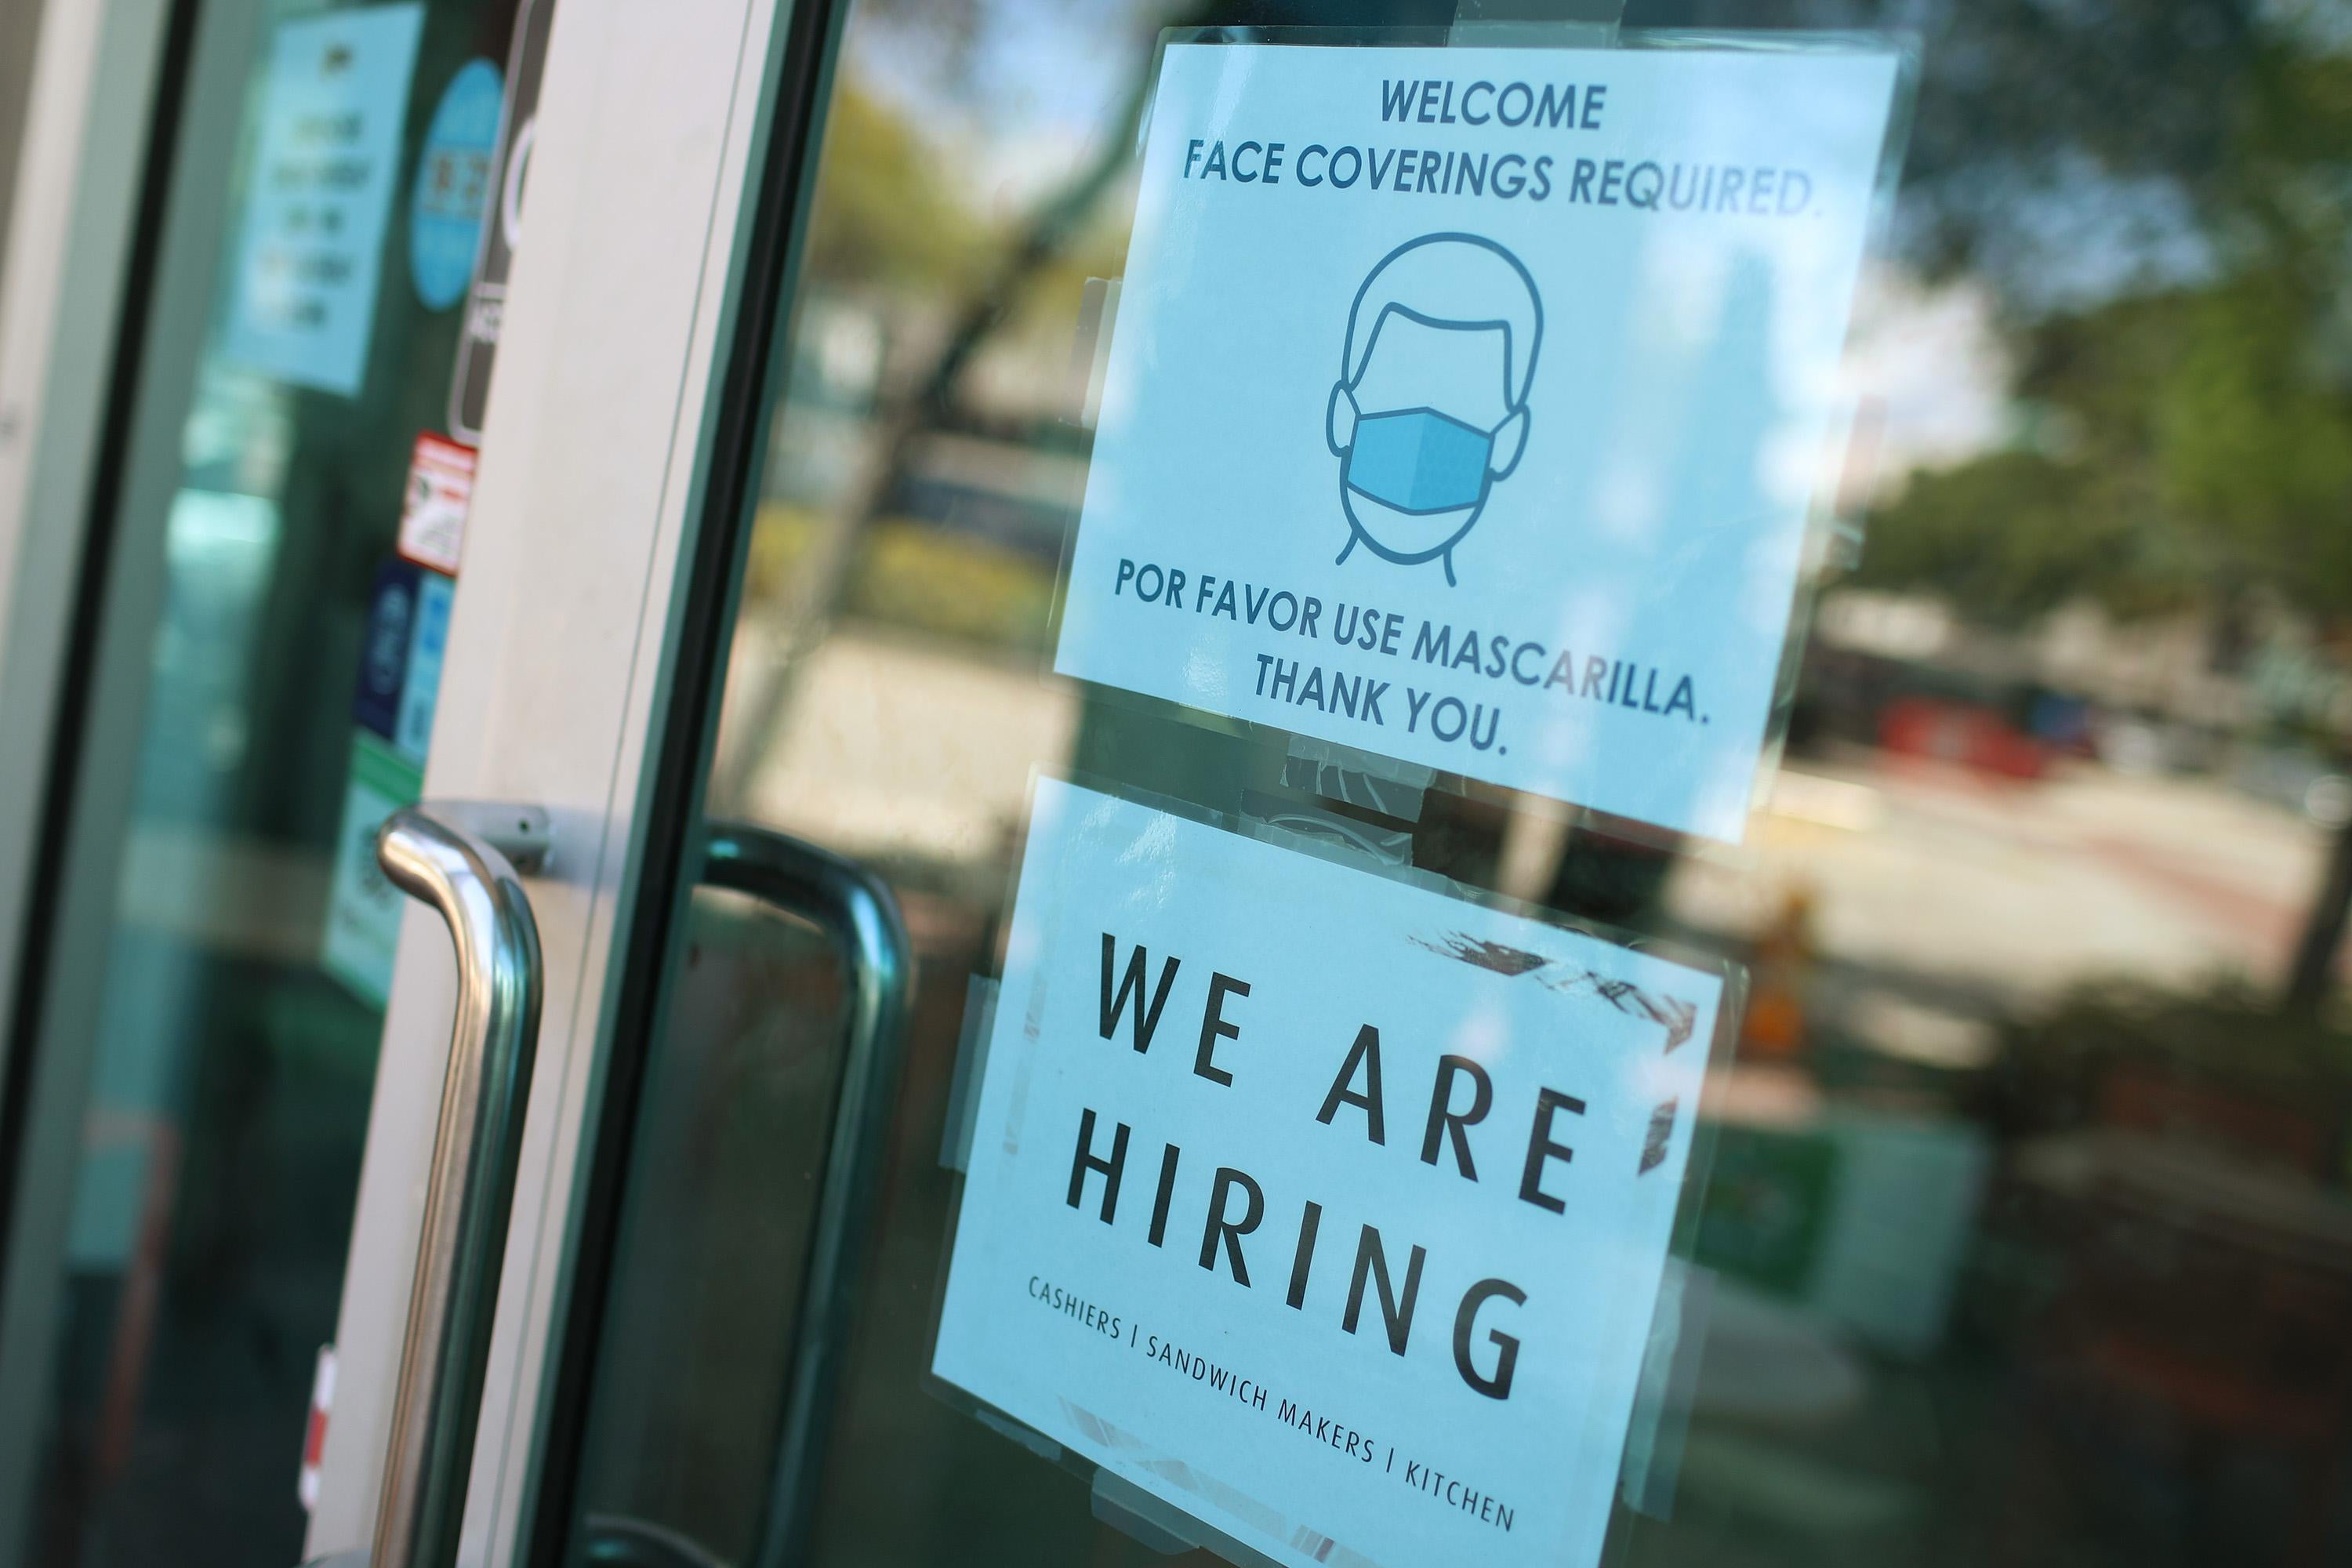 MIAMI, FLORIDA - MARCH 05: A 'we are hiring' sign in front of a store on March 05, 2021 in Miami, Florida. The restaurant is looking to hire more workers as the U.S. unemployment rate drops to 6.2 percent, as many restaurants and bars reopen. Officials credit the job growth to declining new COVID-19 cases and broadening vaccine immunization that has helped more businesses reopen with greater capacity. (Photo by Joe Raedle/Getty Images)